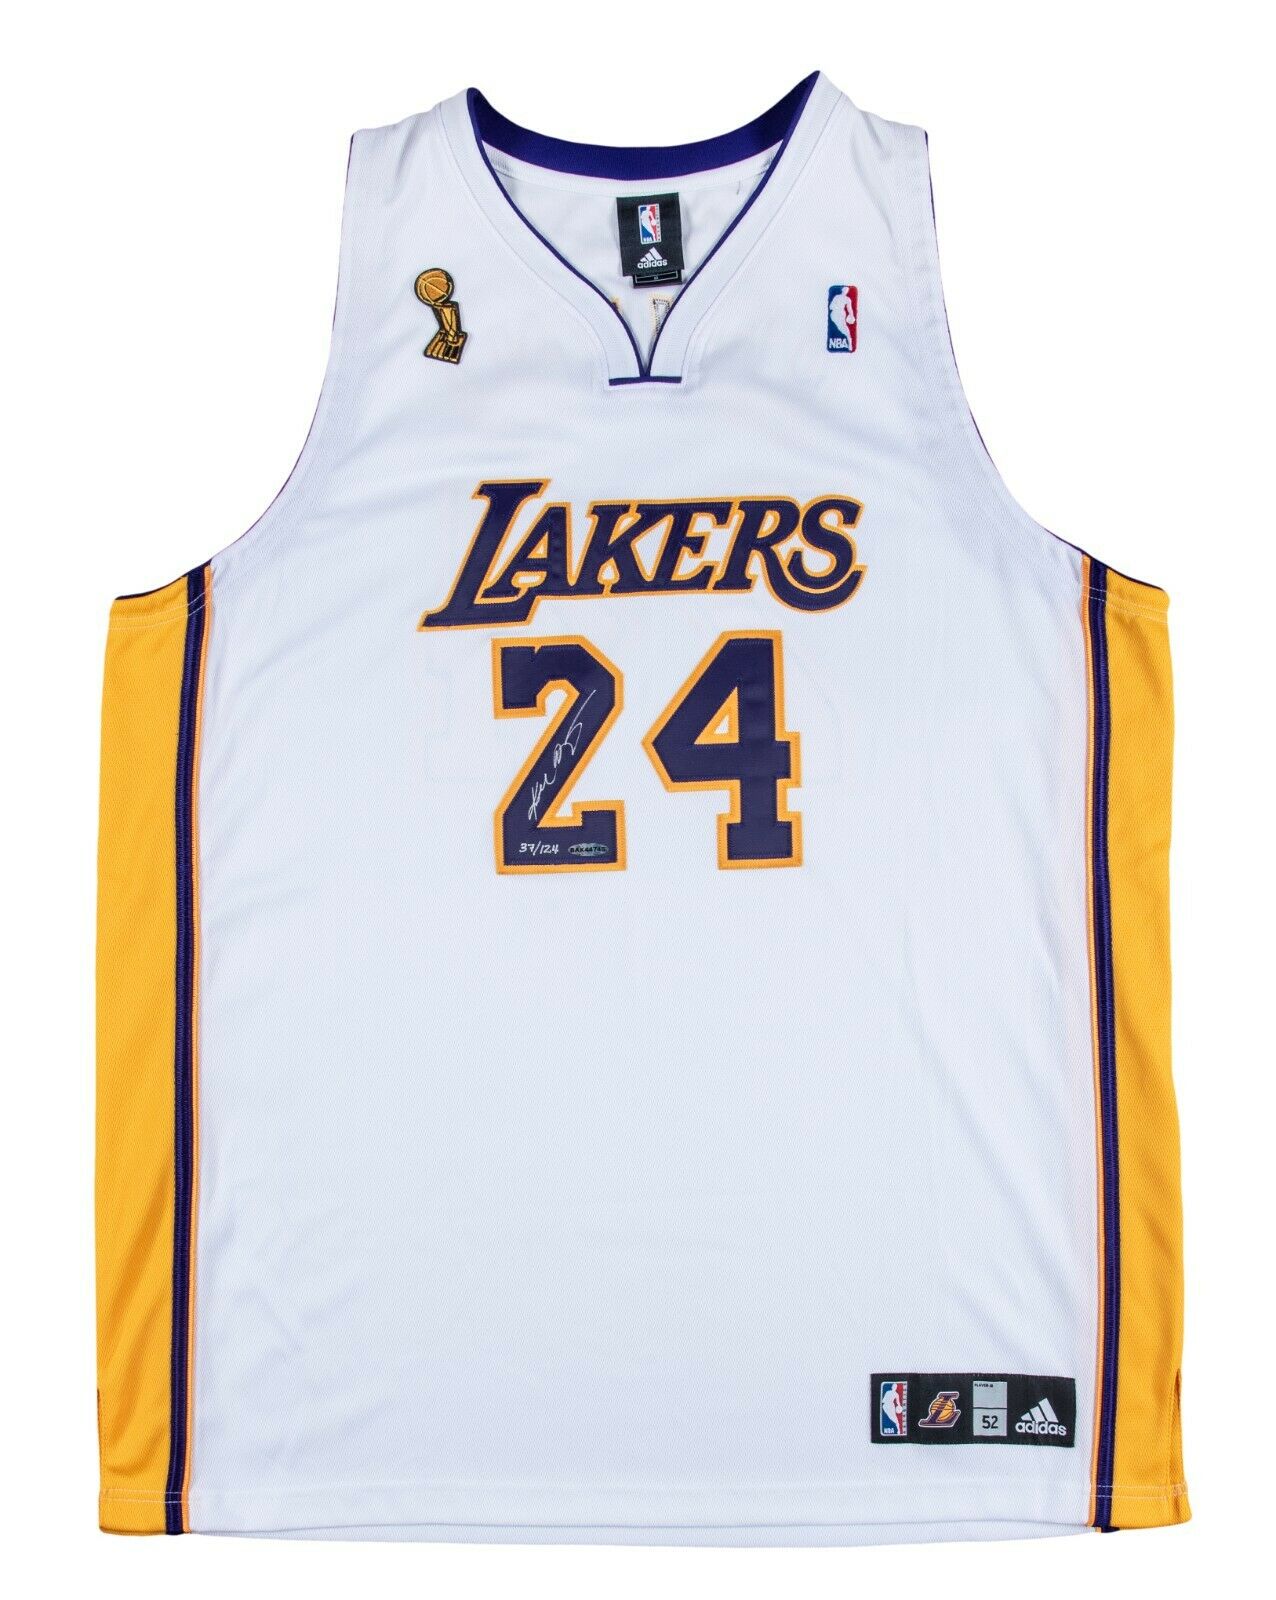 Kobe Bryant Mamba Out Signed #24 Authentic Los Angeles Lakers